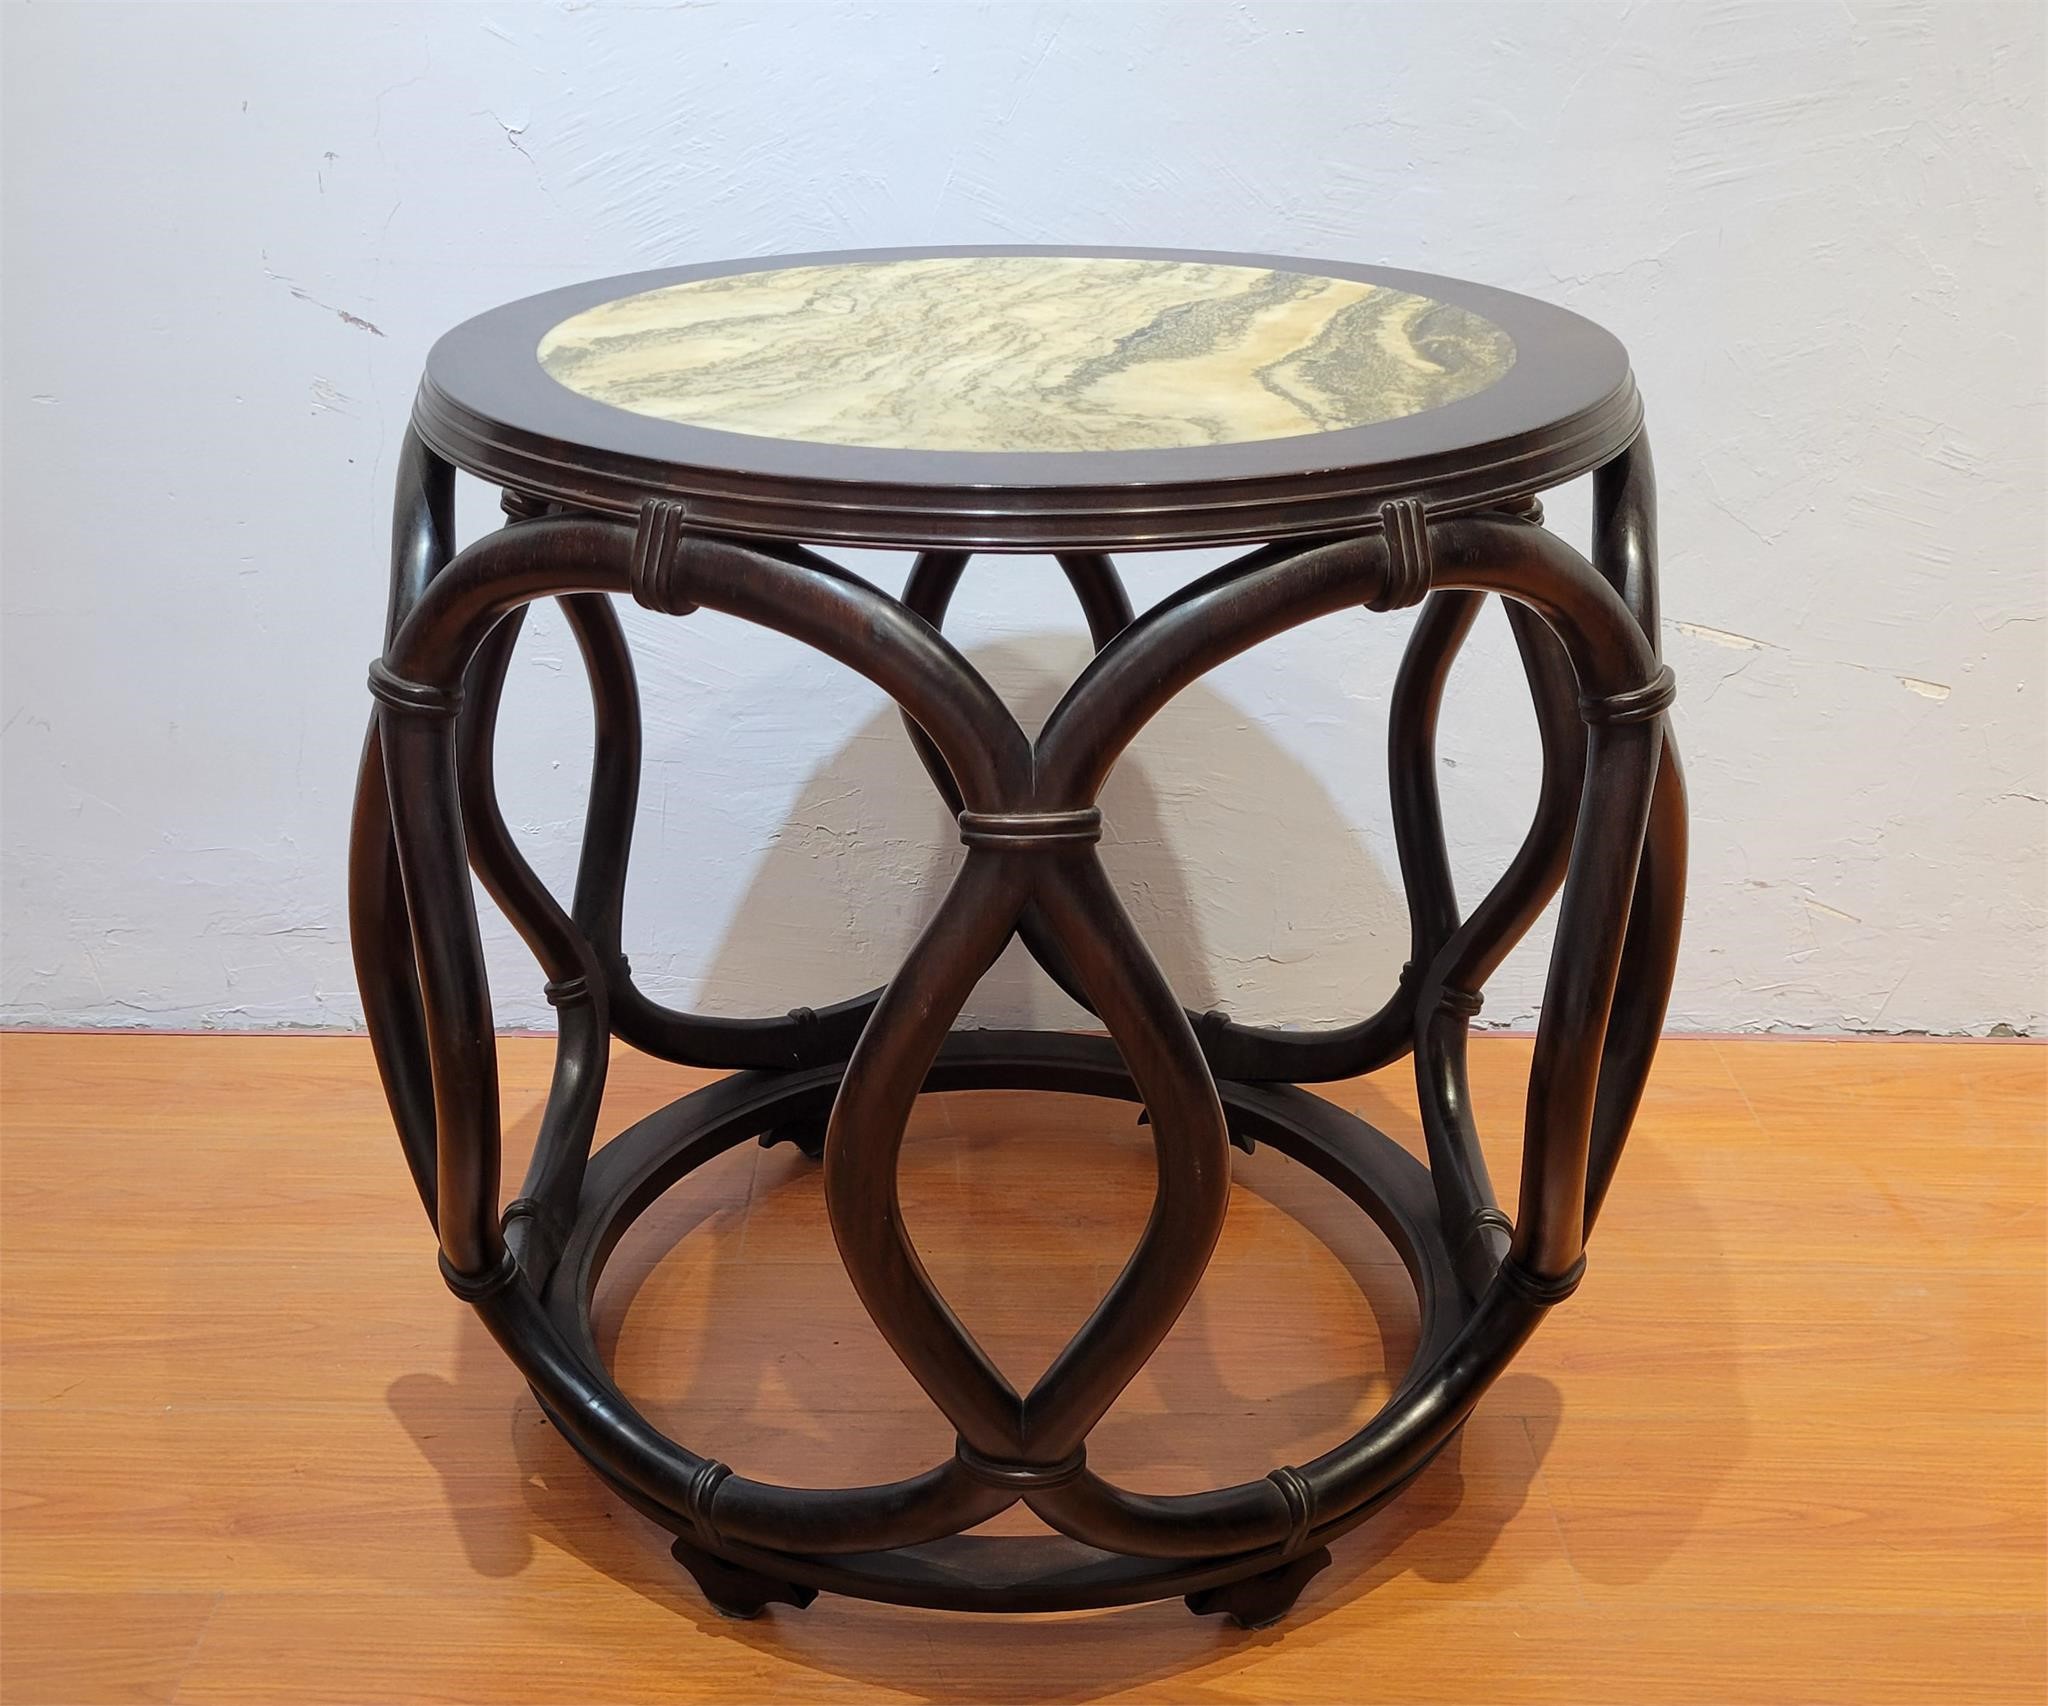 Rosewood garden table inlaid with marble in Qing D